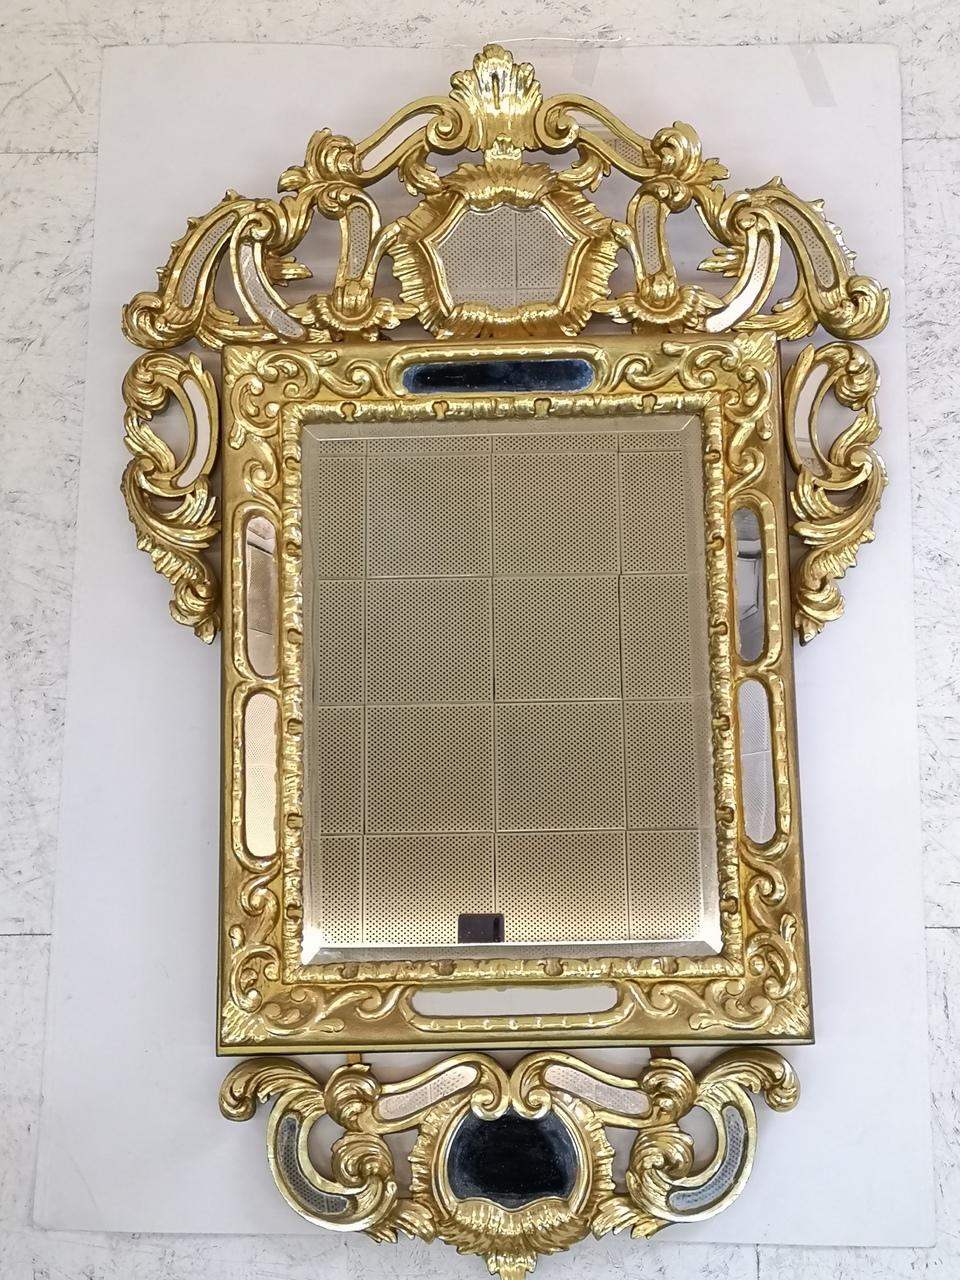 A hand carved and gold-plated wooden mirror, from the 19th century.